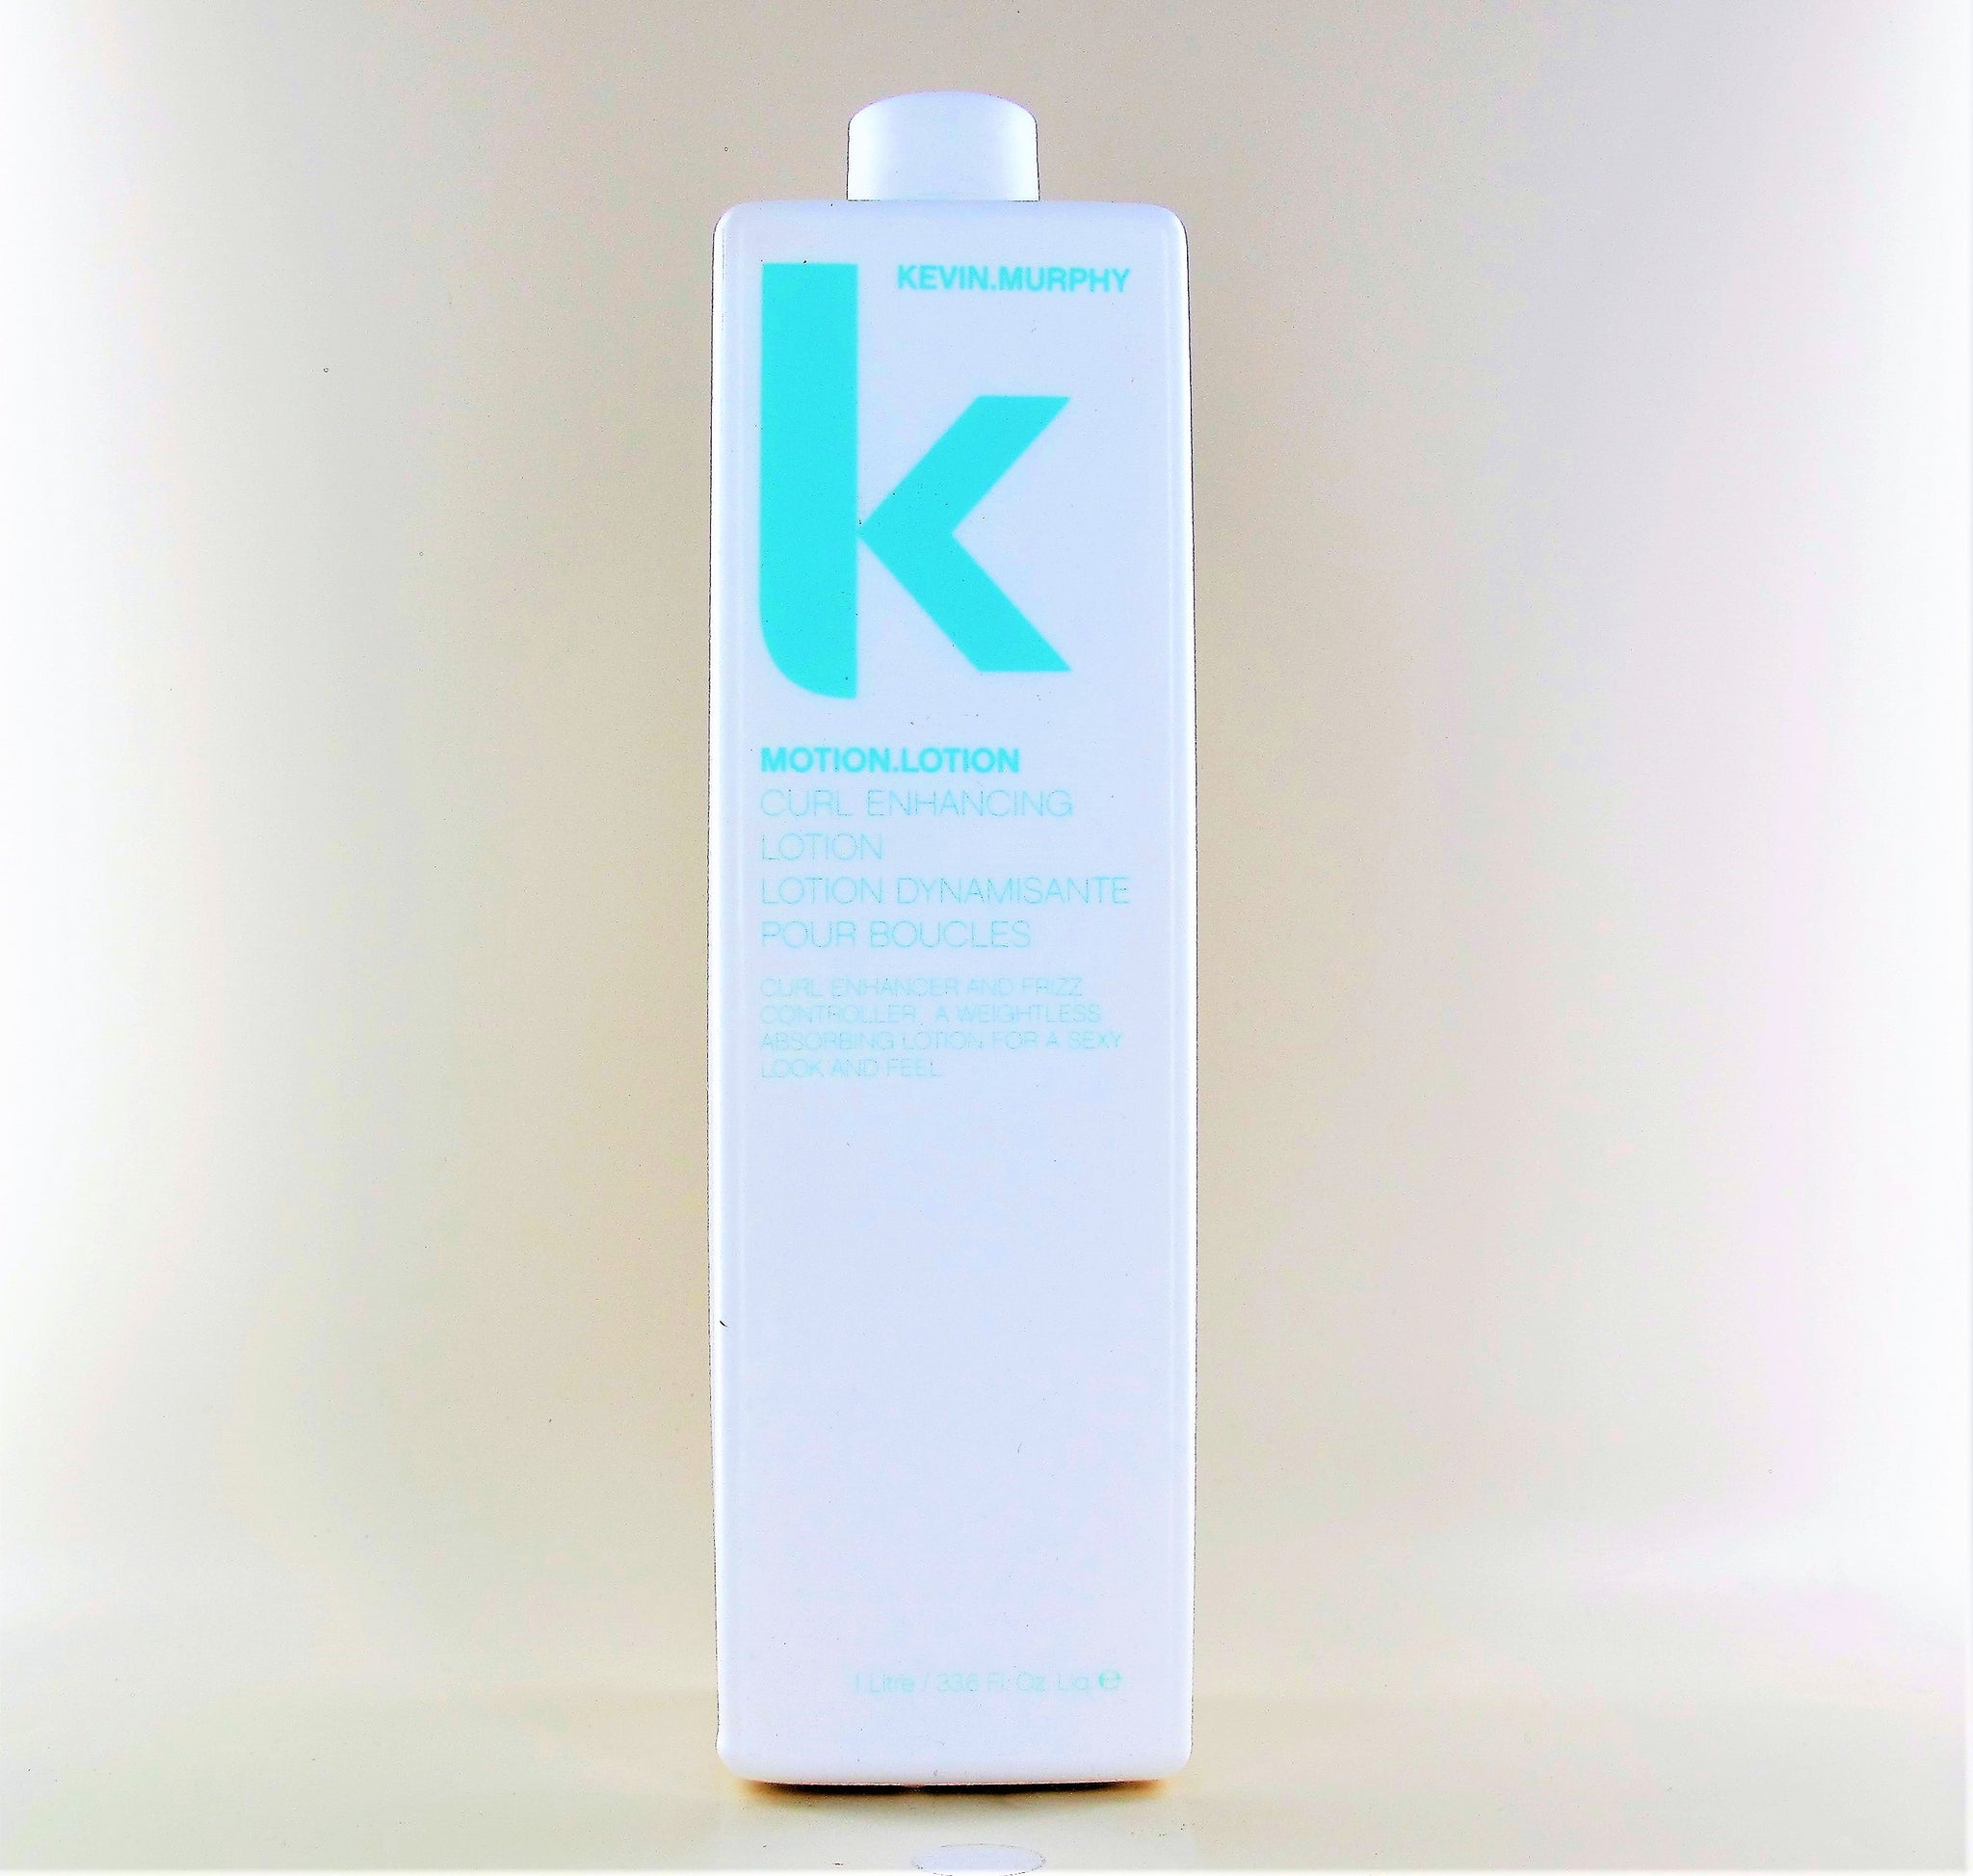 KEVIN MURPHY Motion Lotion Curl Enhancing Lotion 33.6 oz